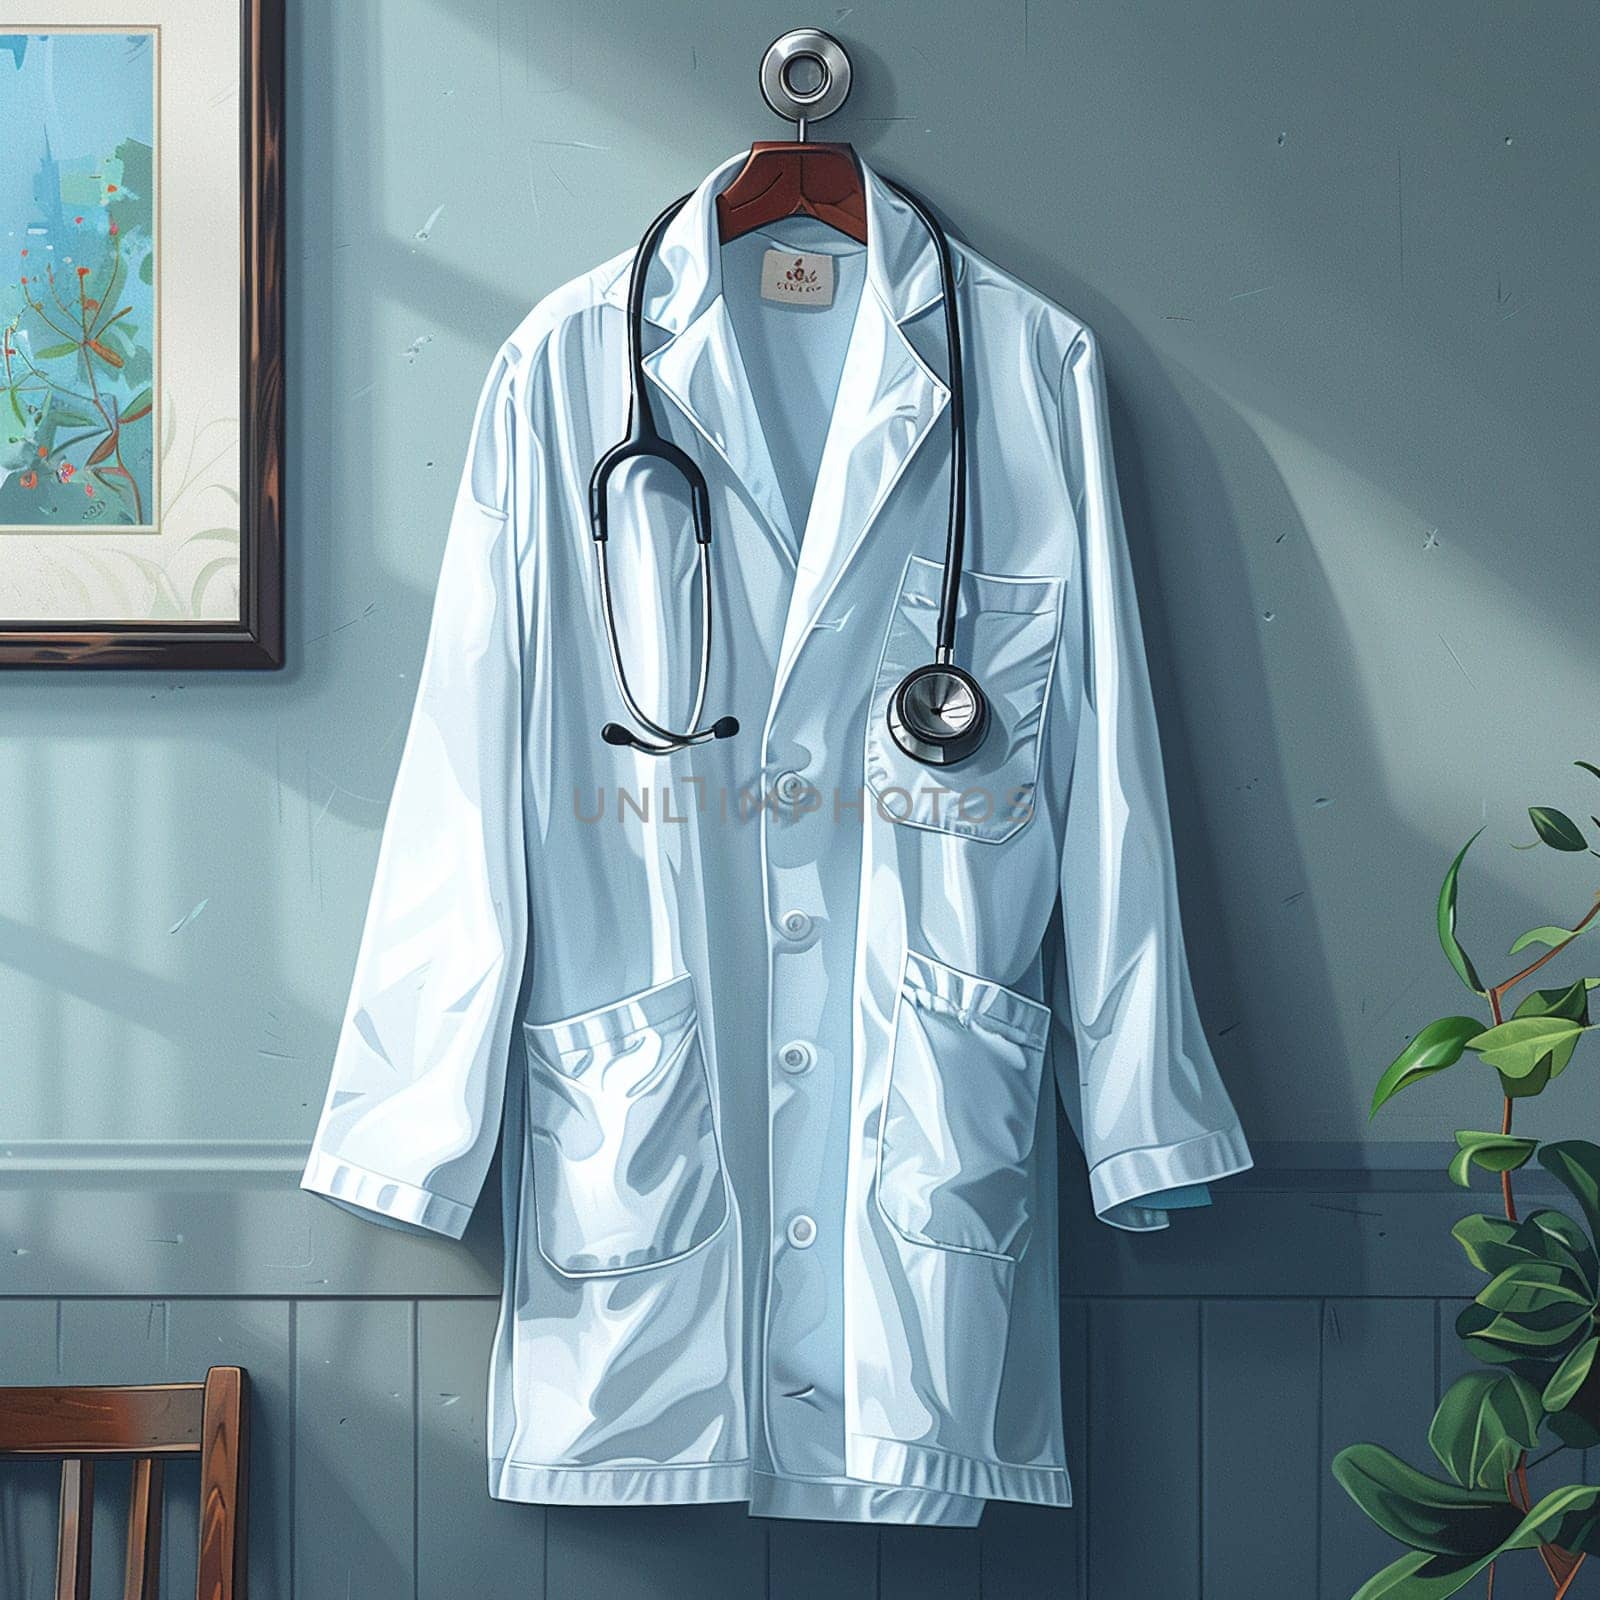 Illustration of stethoscope and white coat hanging on wall for National Doctors Day. by Benzoix